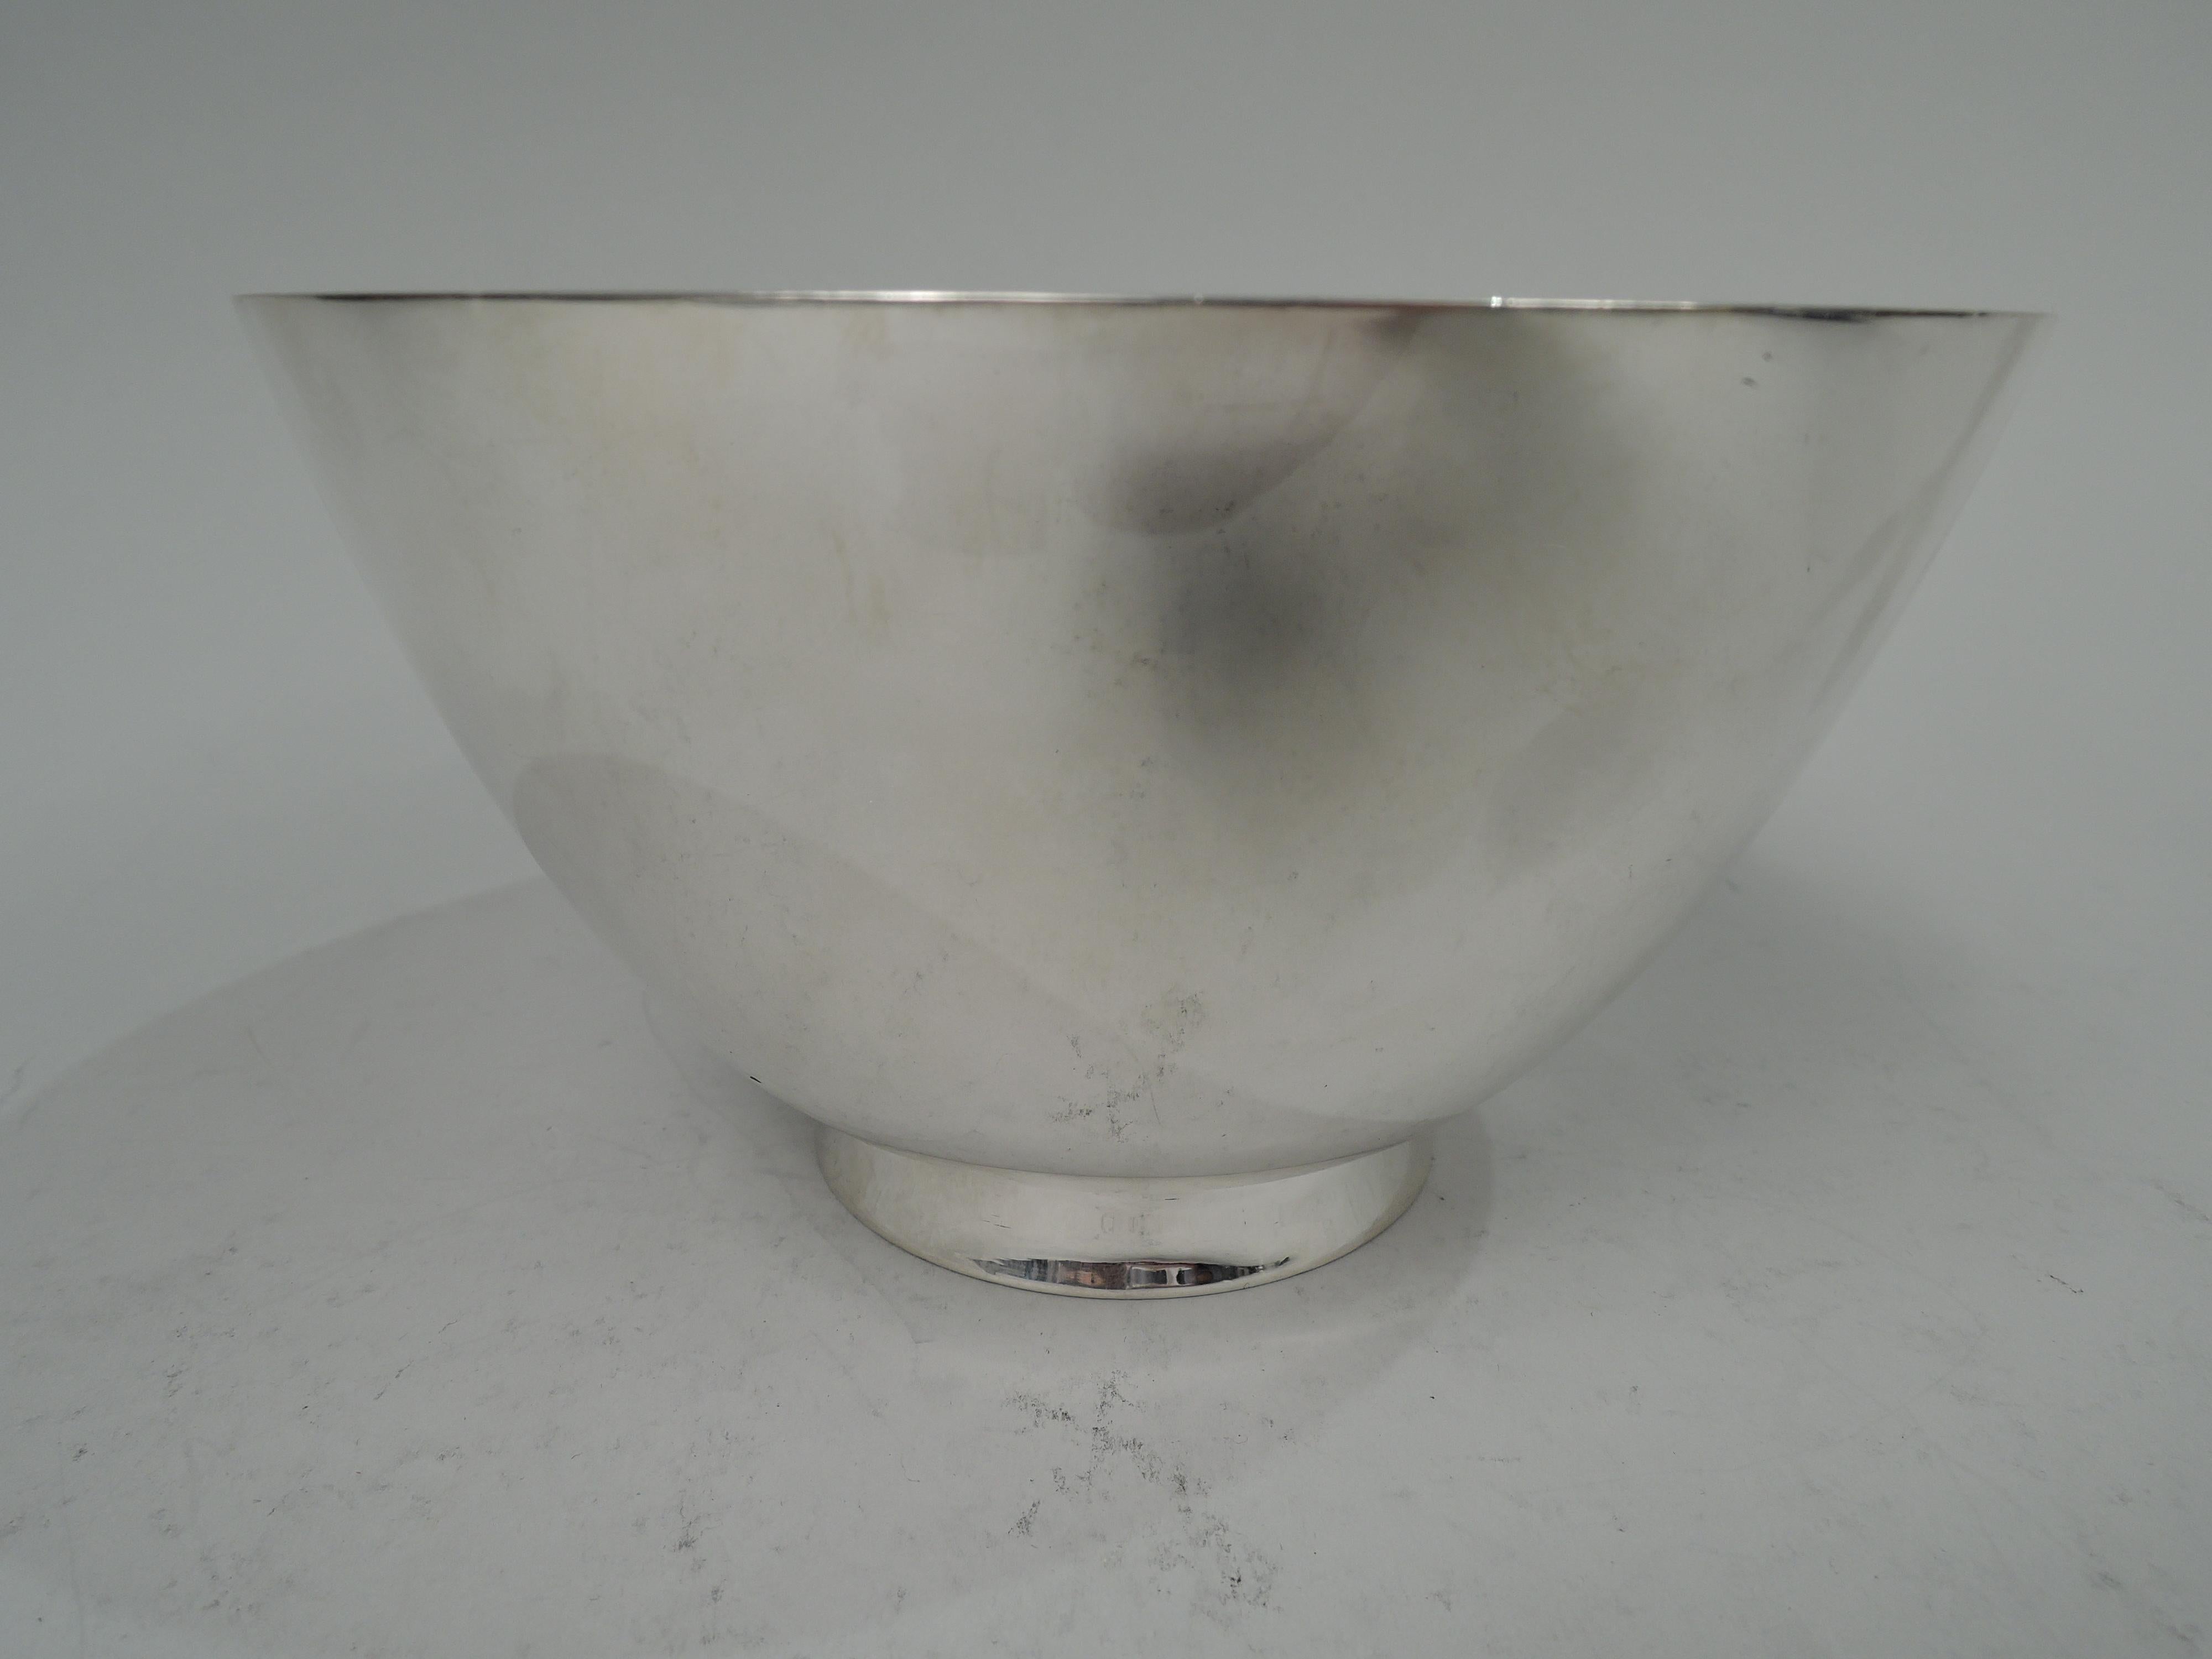 Art Deco sterling silver bowl. Made by Tiffany & Co. in New York. Curved and tapering sides; short and splayed foot. Fully marked including maker’s stamp, pattern no. 20024, and director’s letter M (1947-56). Weight: 11 troy ounces. 